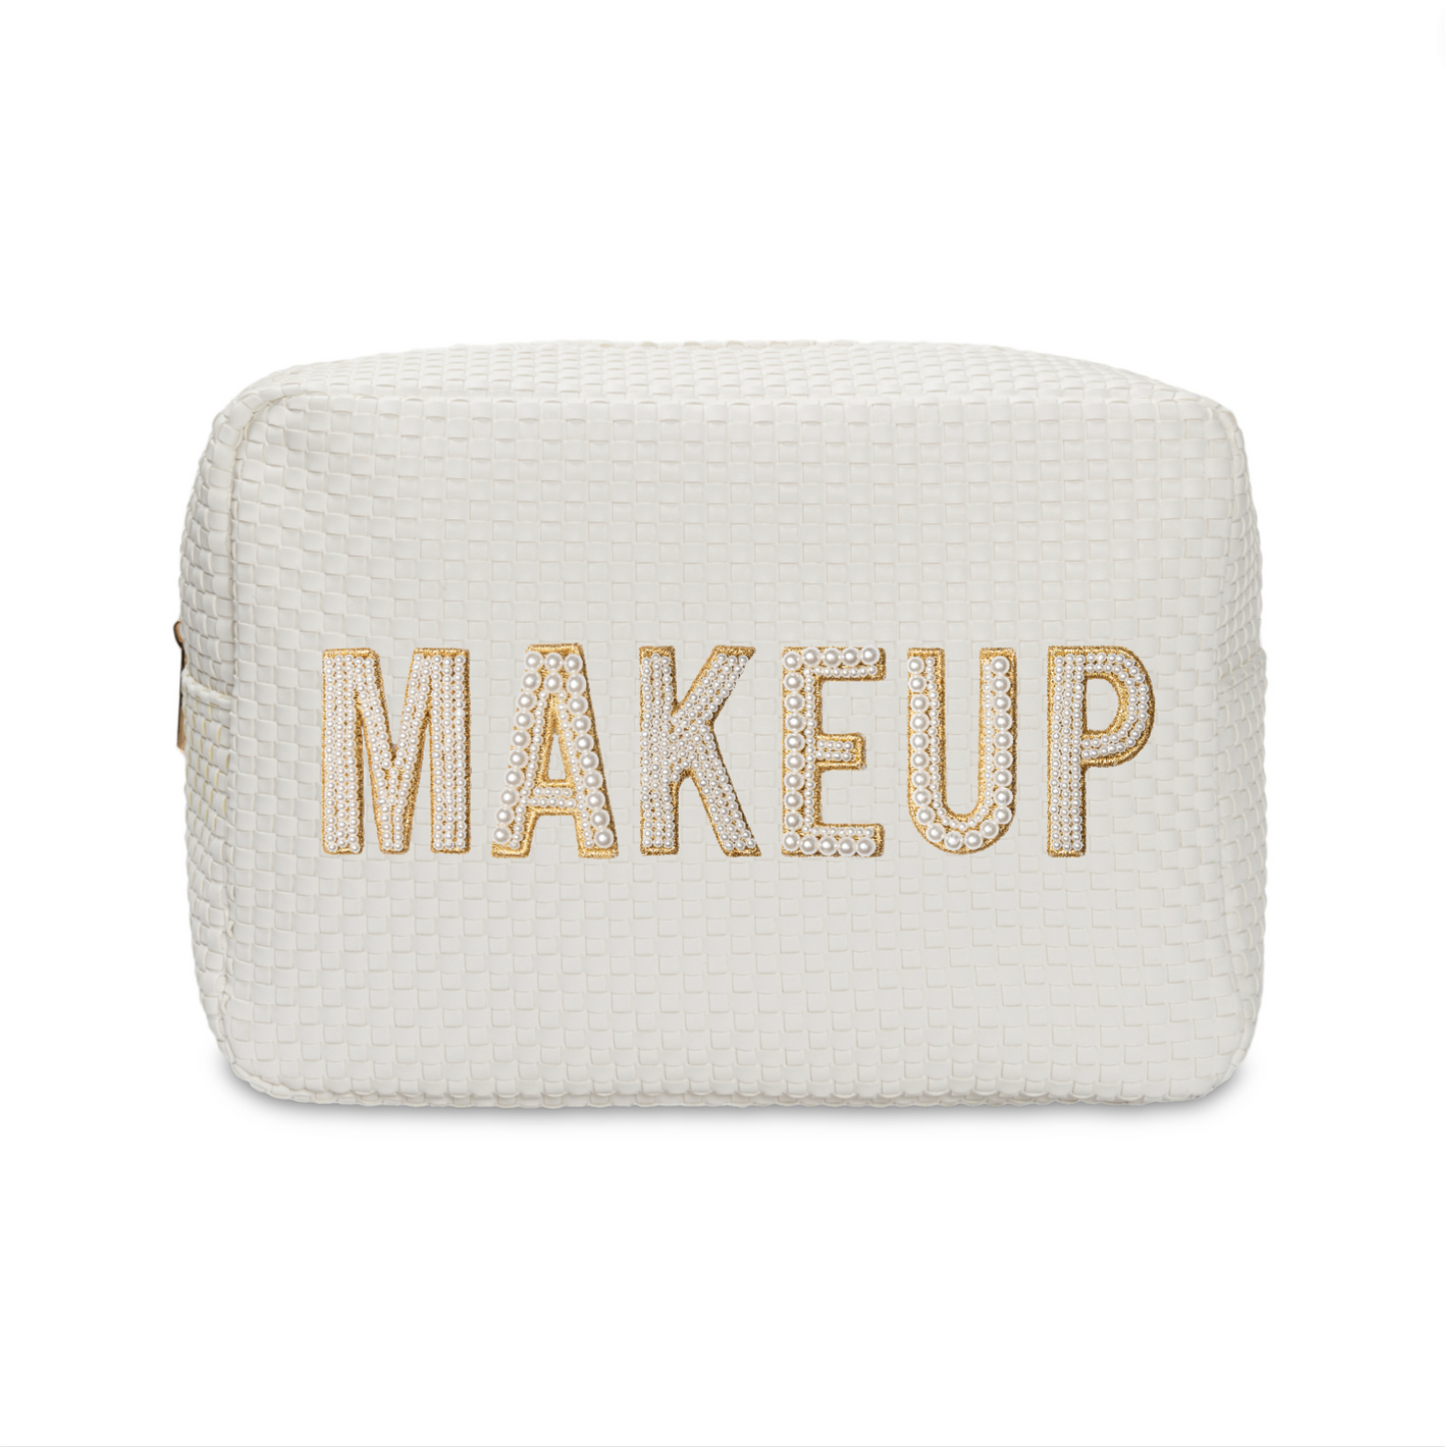 Makeup big pouch with pearl stones